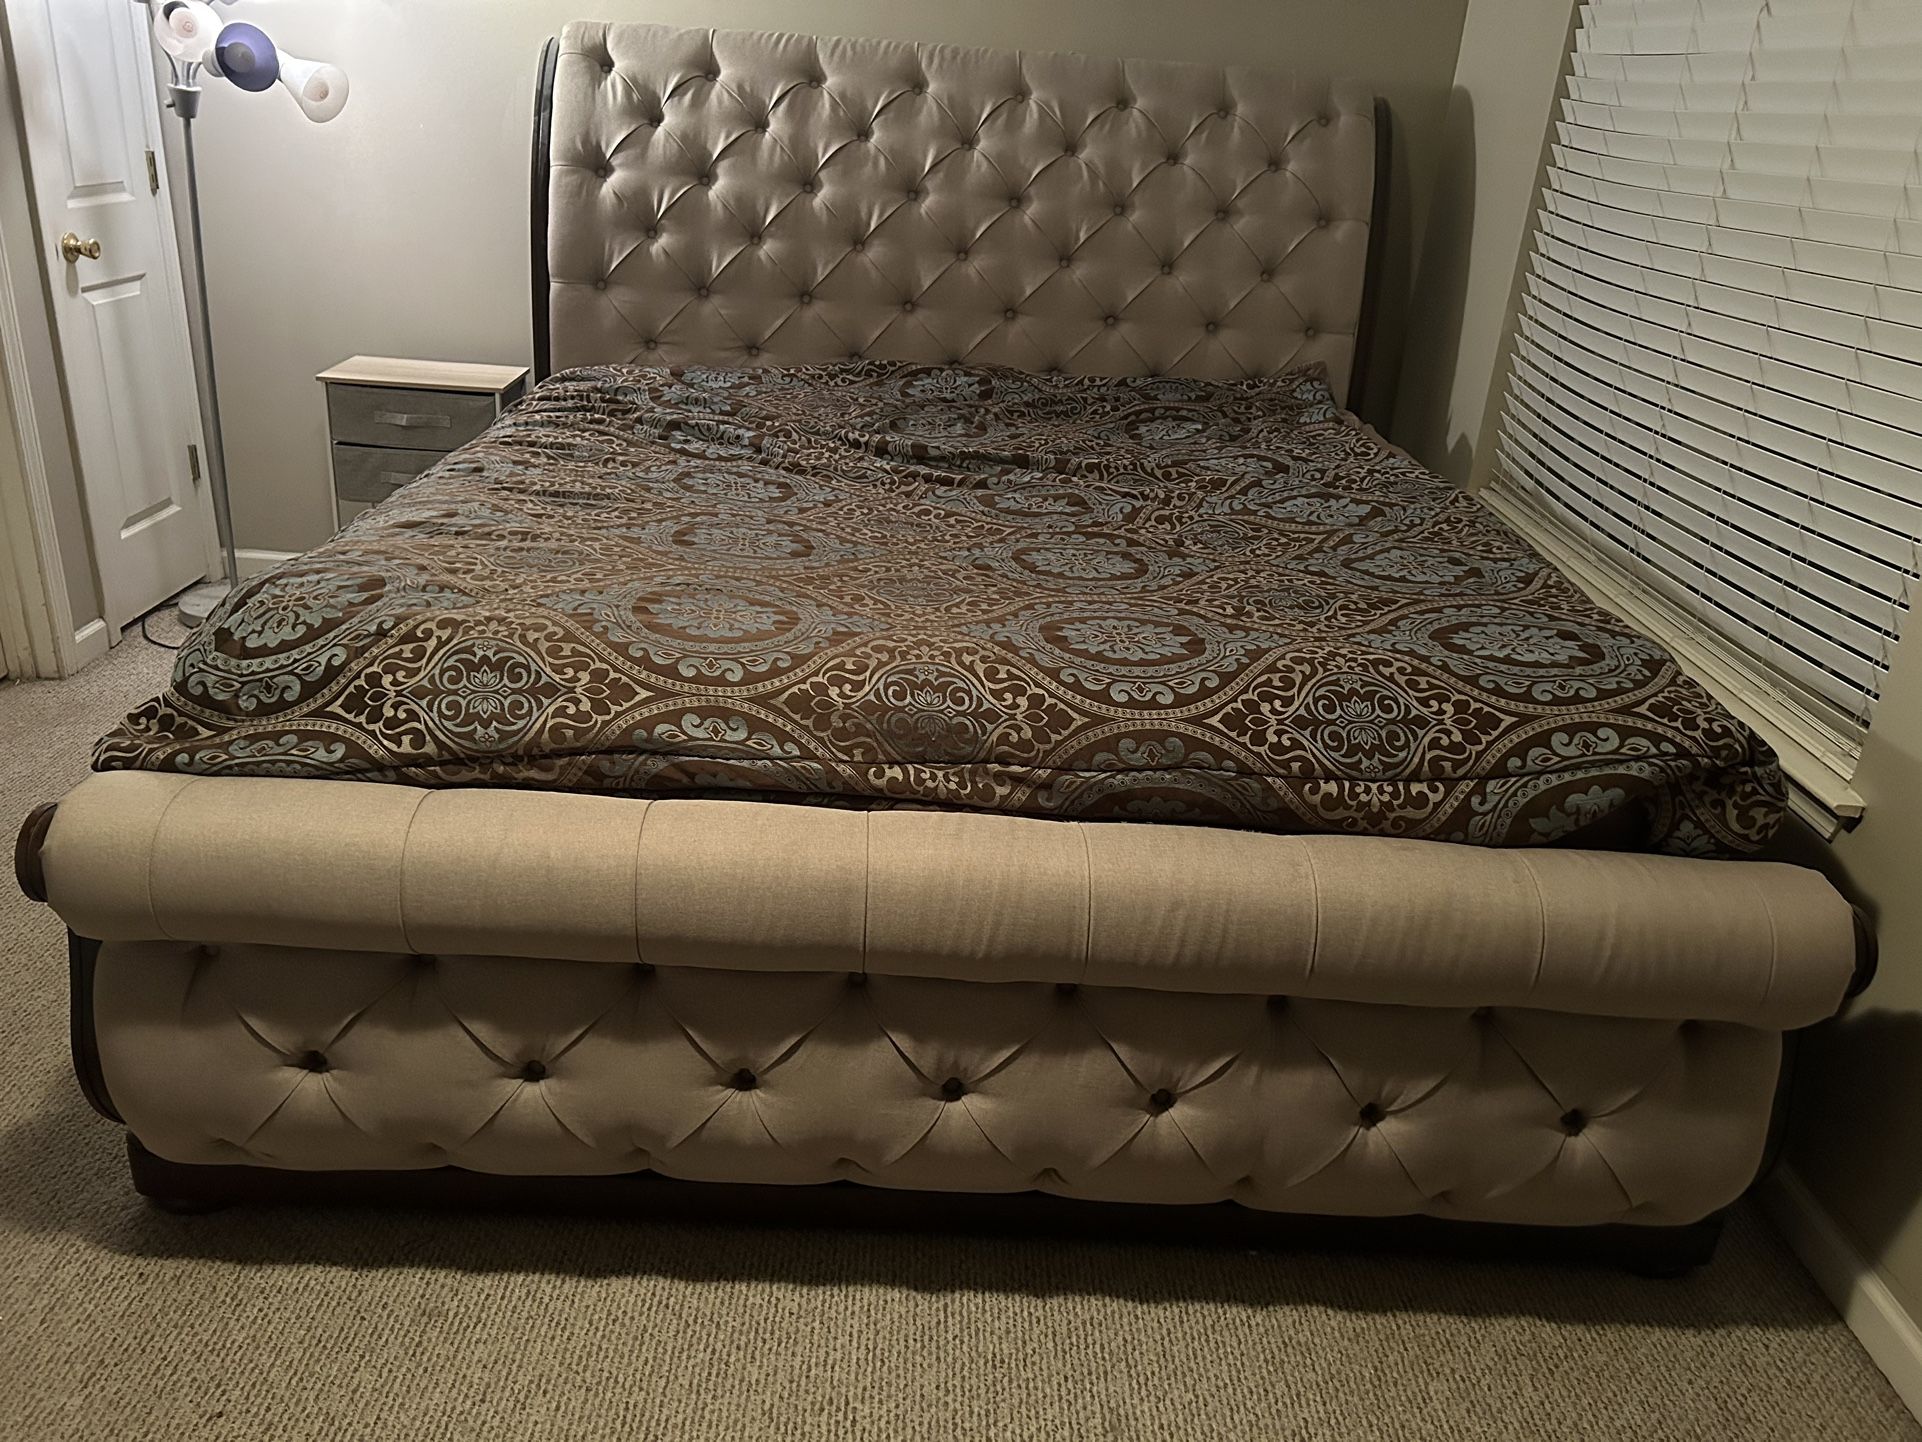 King Size Bed With A King Size Mattress and Boxsprings